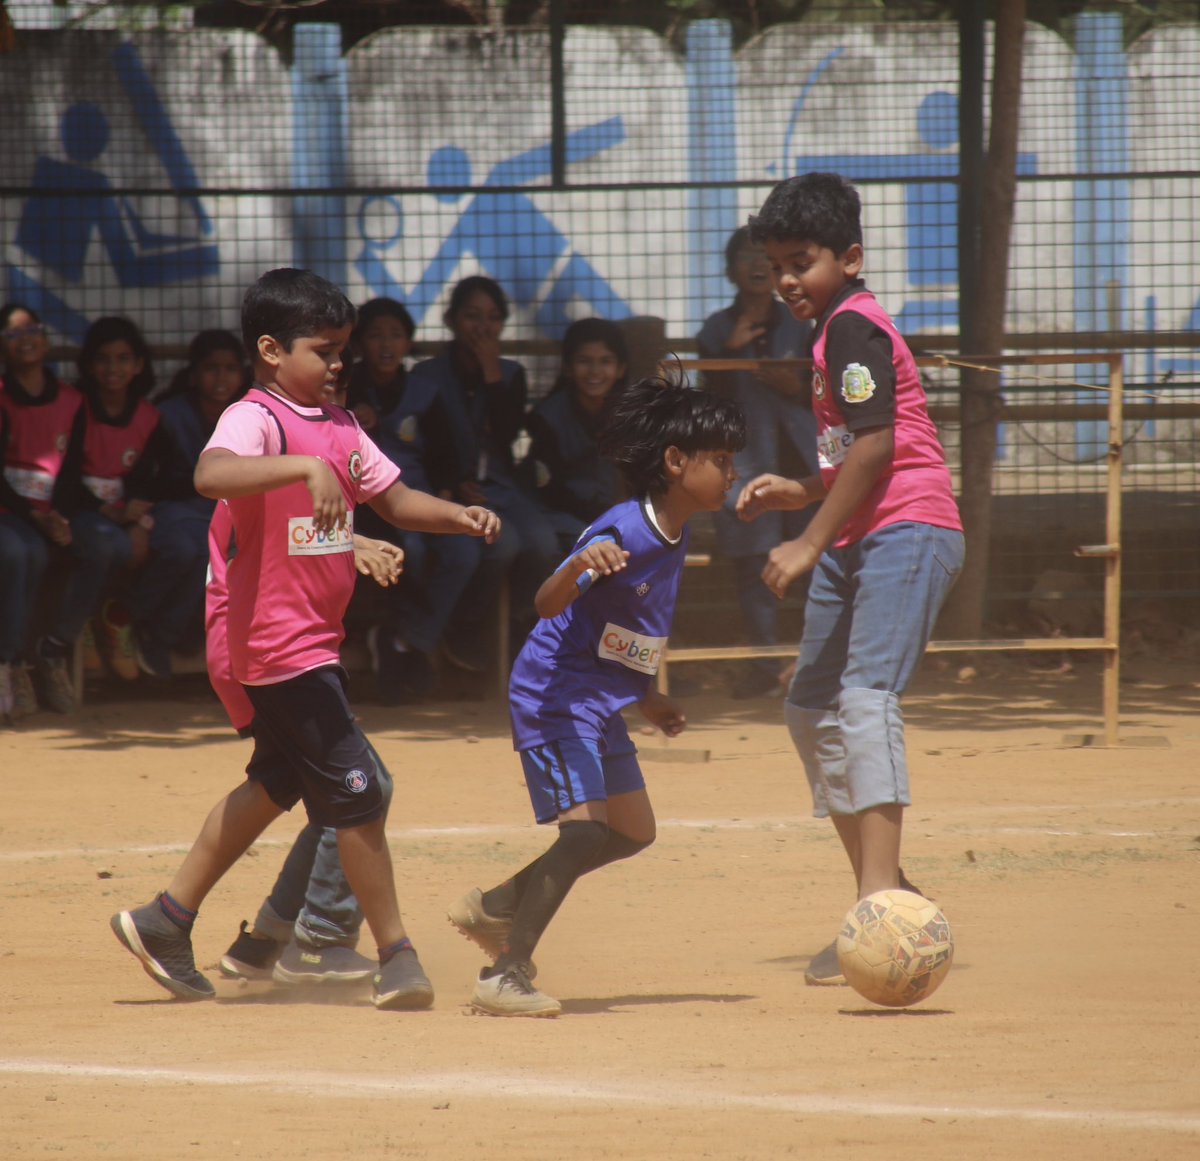 𝐅𝐮𝐞𝐥𝐢𝐧𝐠 𝐝𝐫𝐞𝐚𝐦𝐬 ⭐️ The AIFF Blue Cubs League consists of 278 registered leagues across 26 states, with 189 having been completed, 69 leagues in progress, and 20 leagues coming up 🔜 #IndianFootball ⚽️